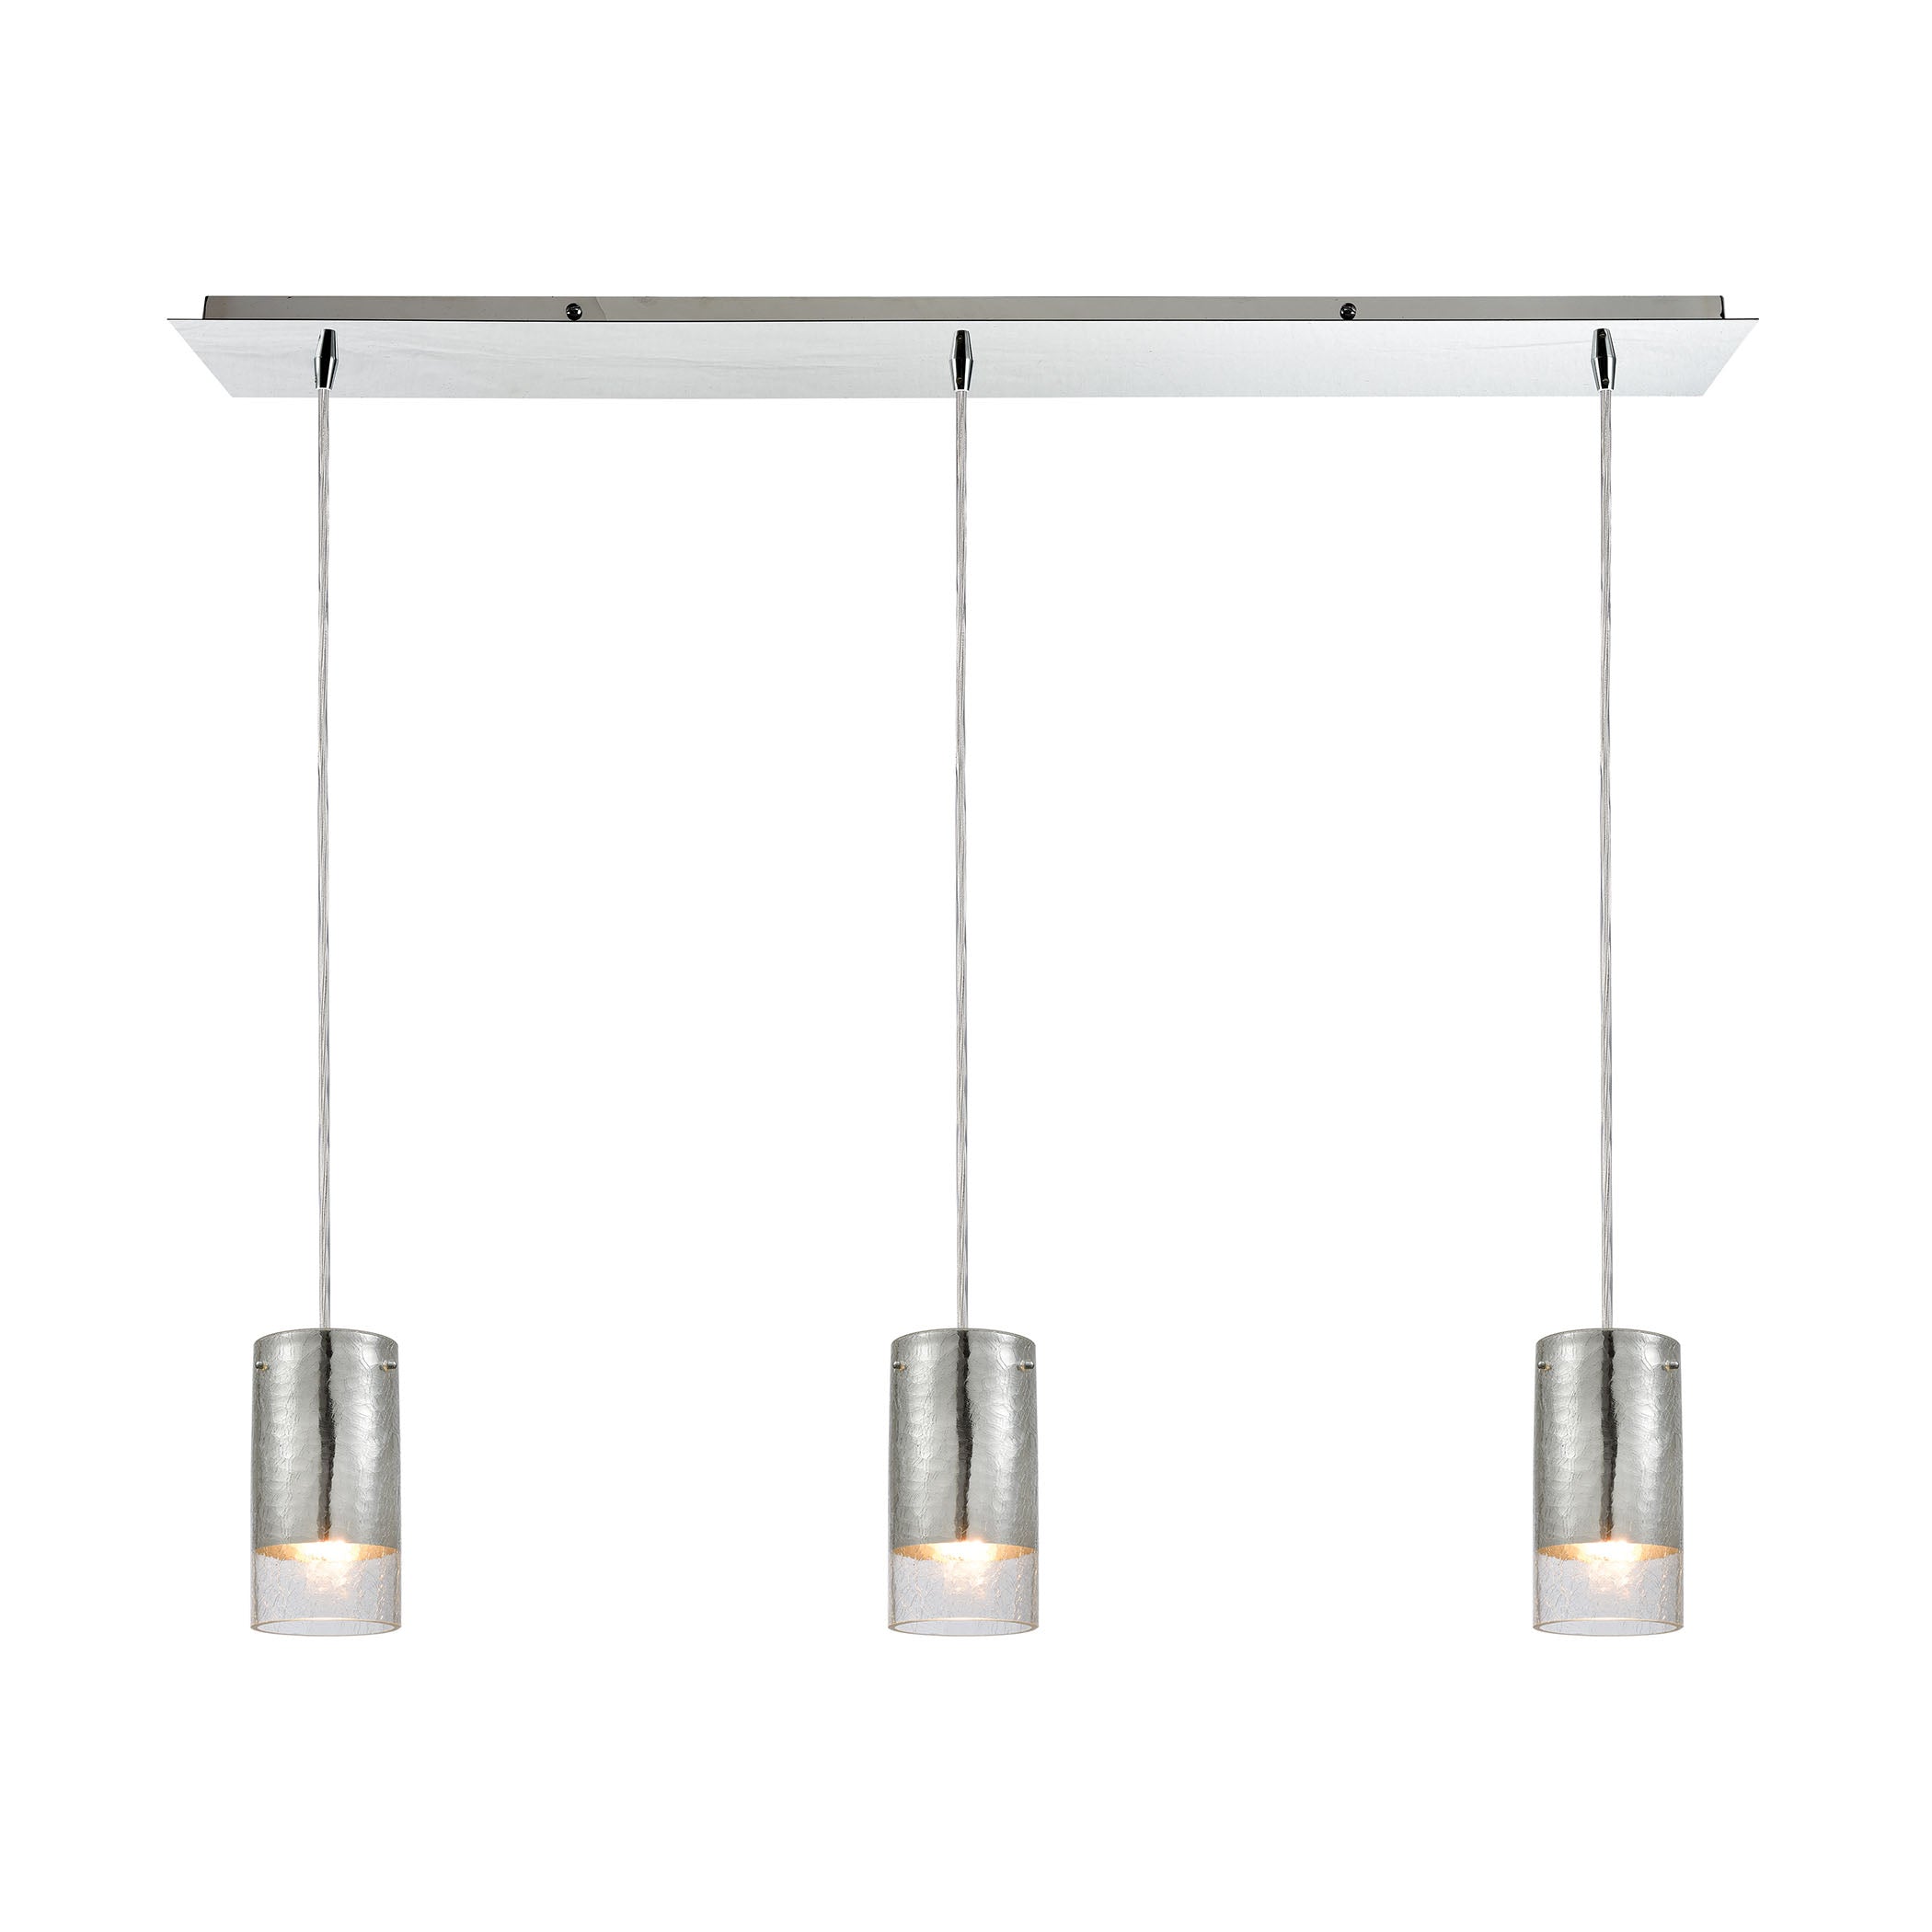 ELK Lighting 10570/3LP Tallula 3-Light Linear Mini Pendant Fixture in Chrome with Chrome-plated and Clear Crackle Glass